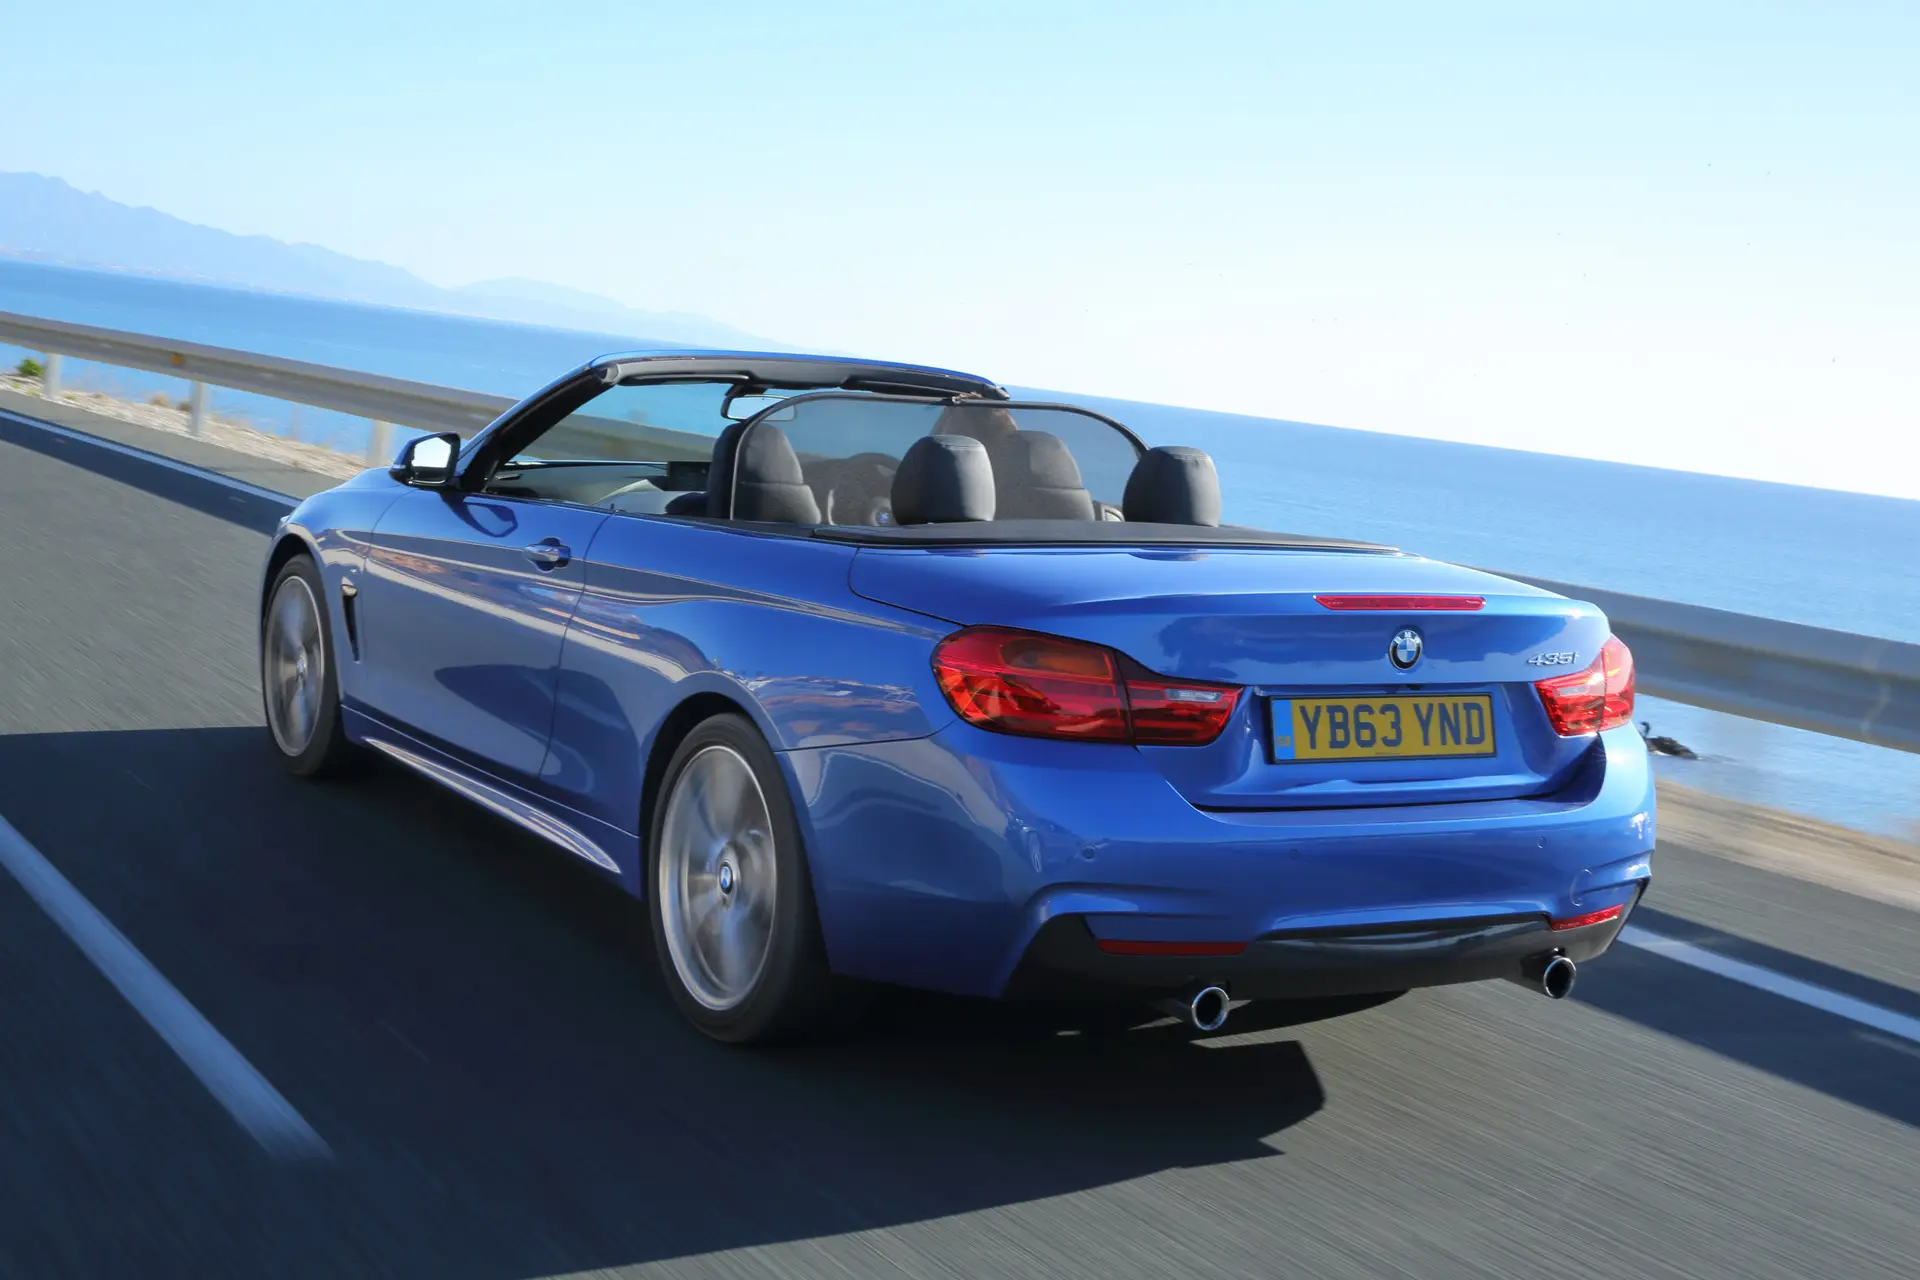 BMW 4 Series Convertible (2014-2020) Review: exterior rear three quarter photo of the BMW 4 Series Convertible on the road